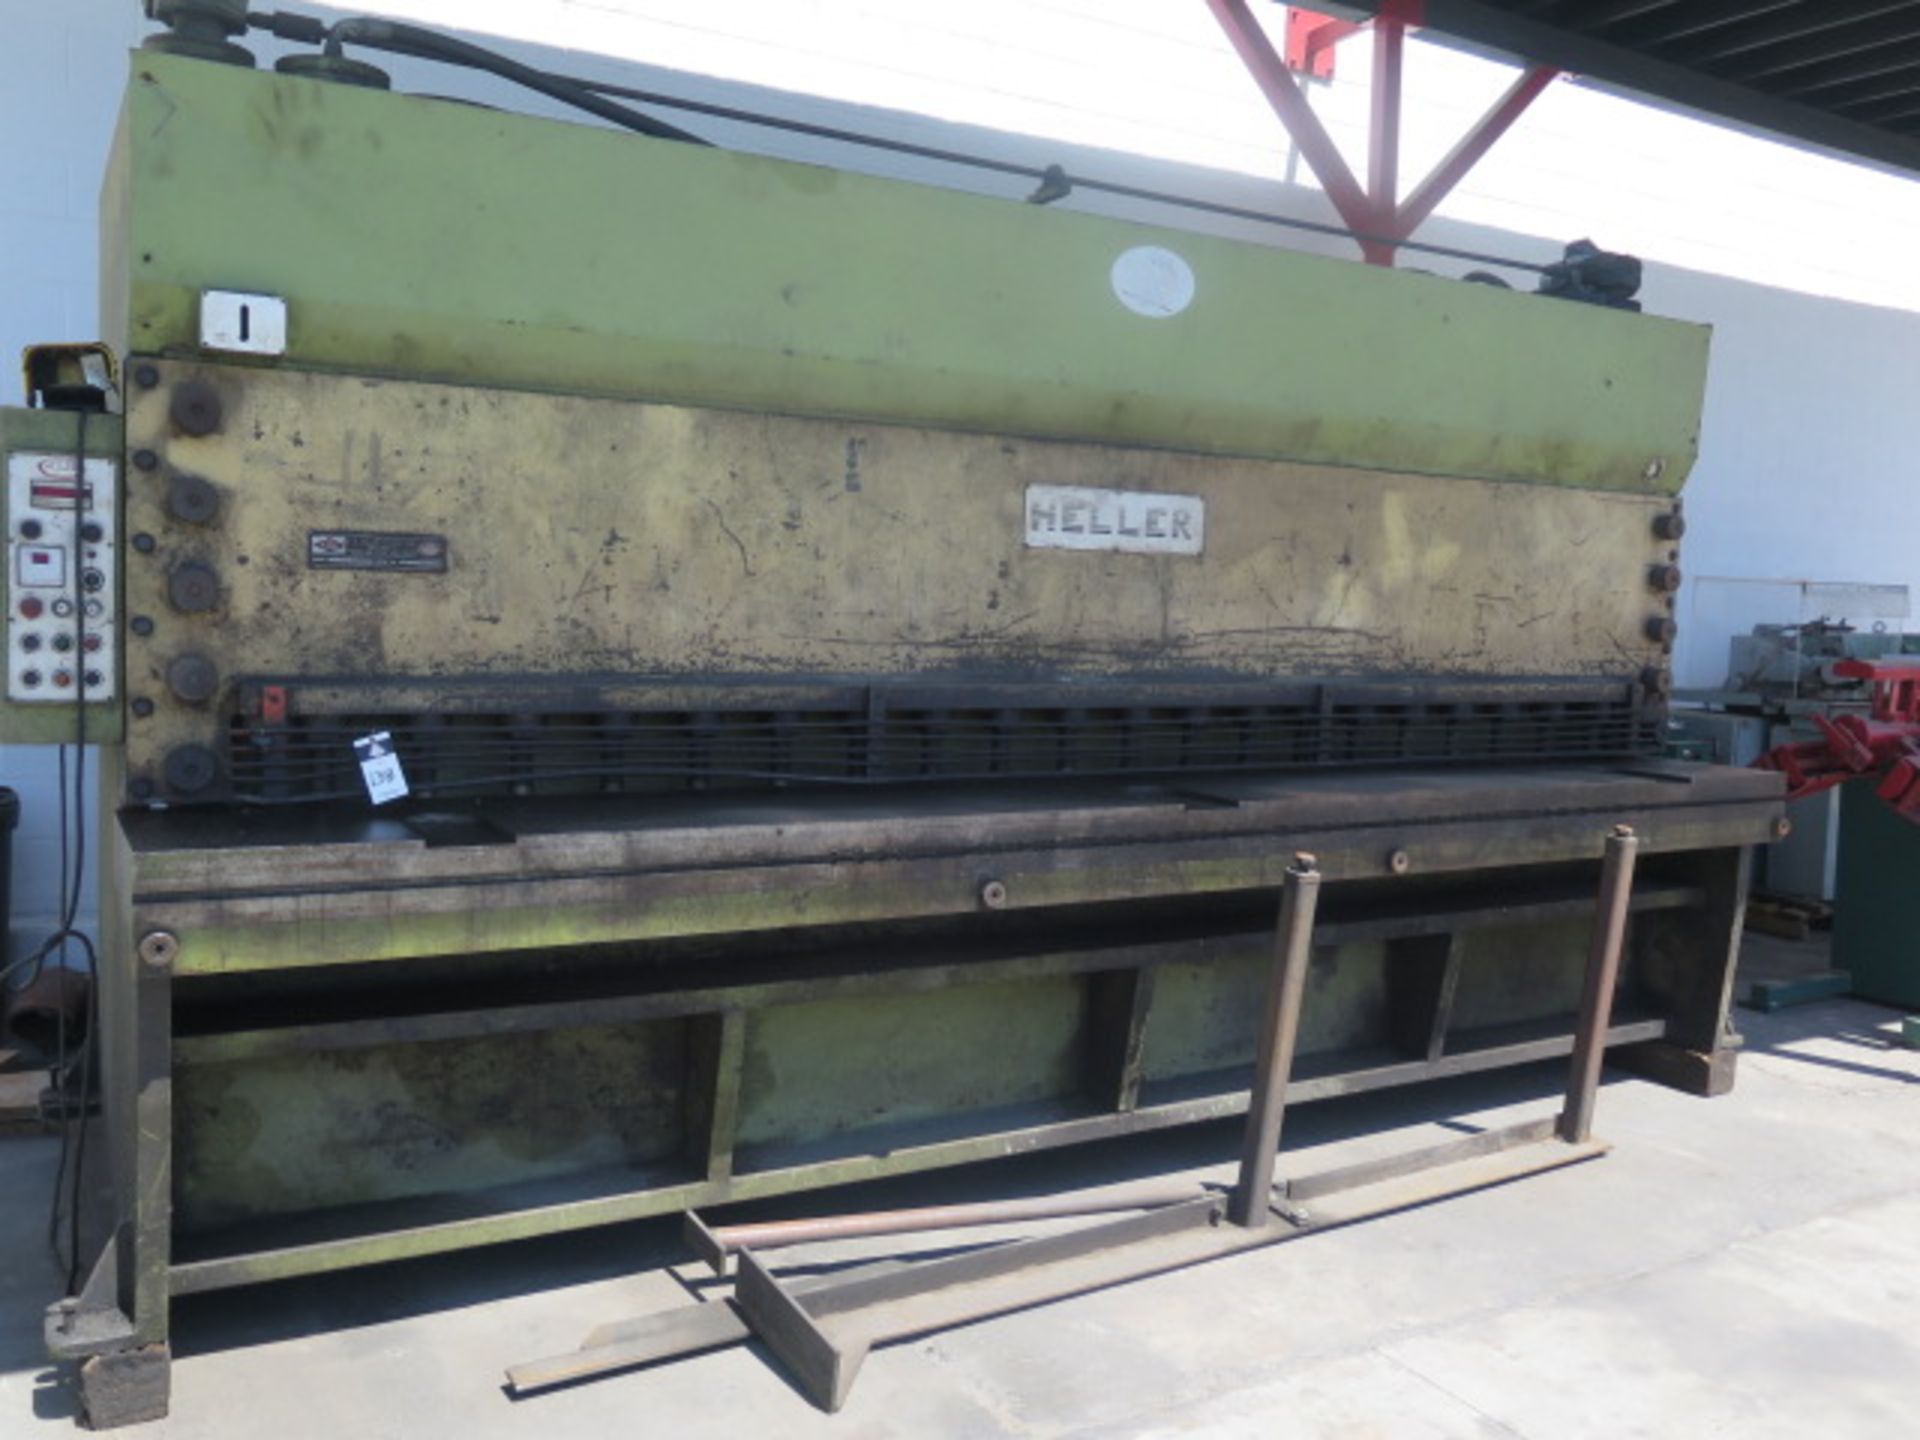 Heller HS-40-10 14’ Power Shear s/n 54686 w/ 36” Controlled Back Gage, Squaring Arm, Front Supports - Image 2 of 9